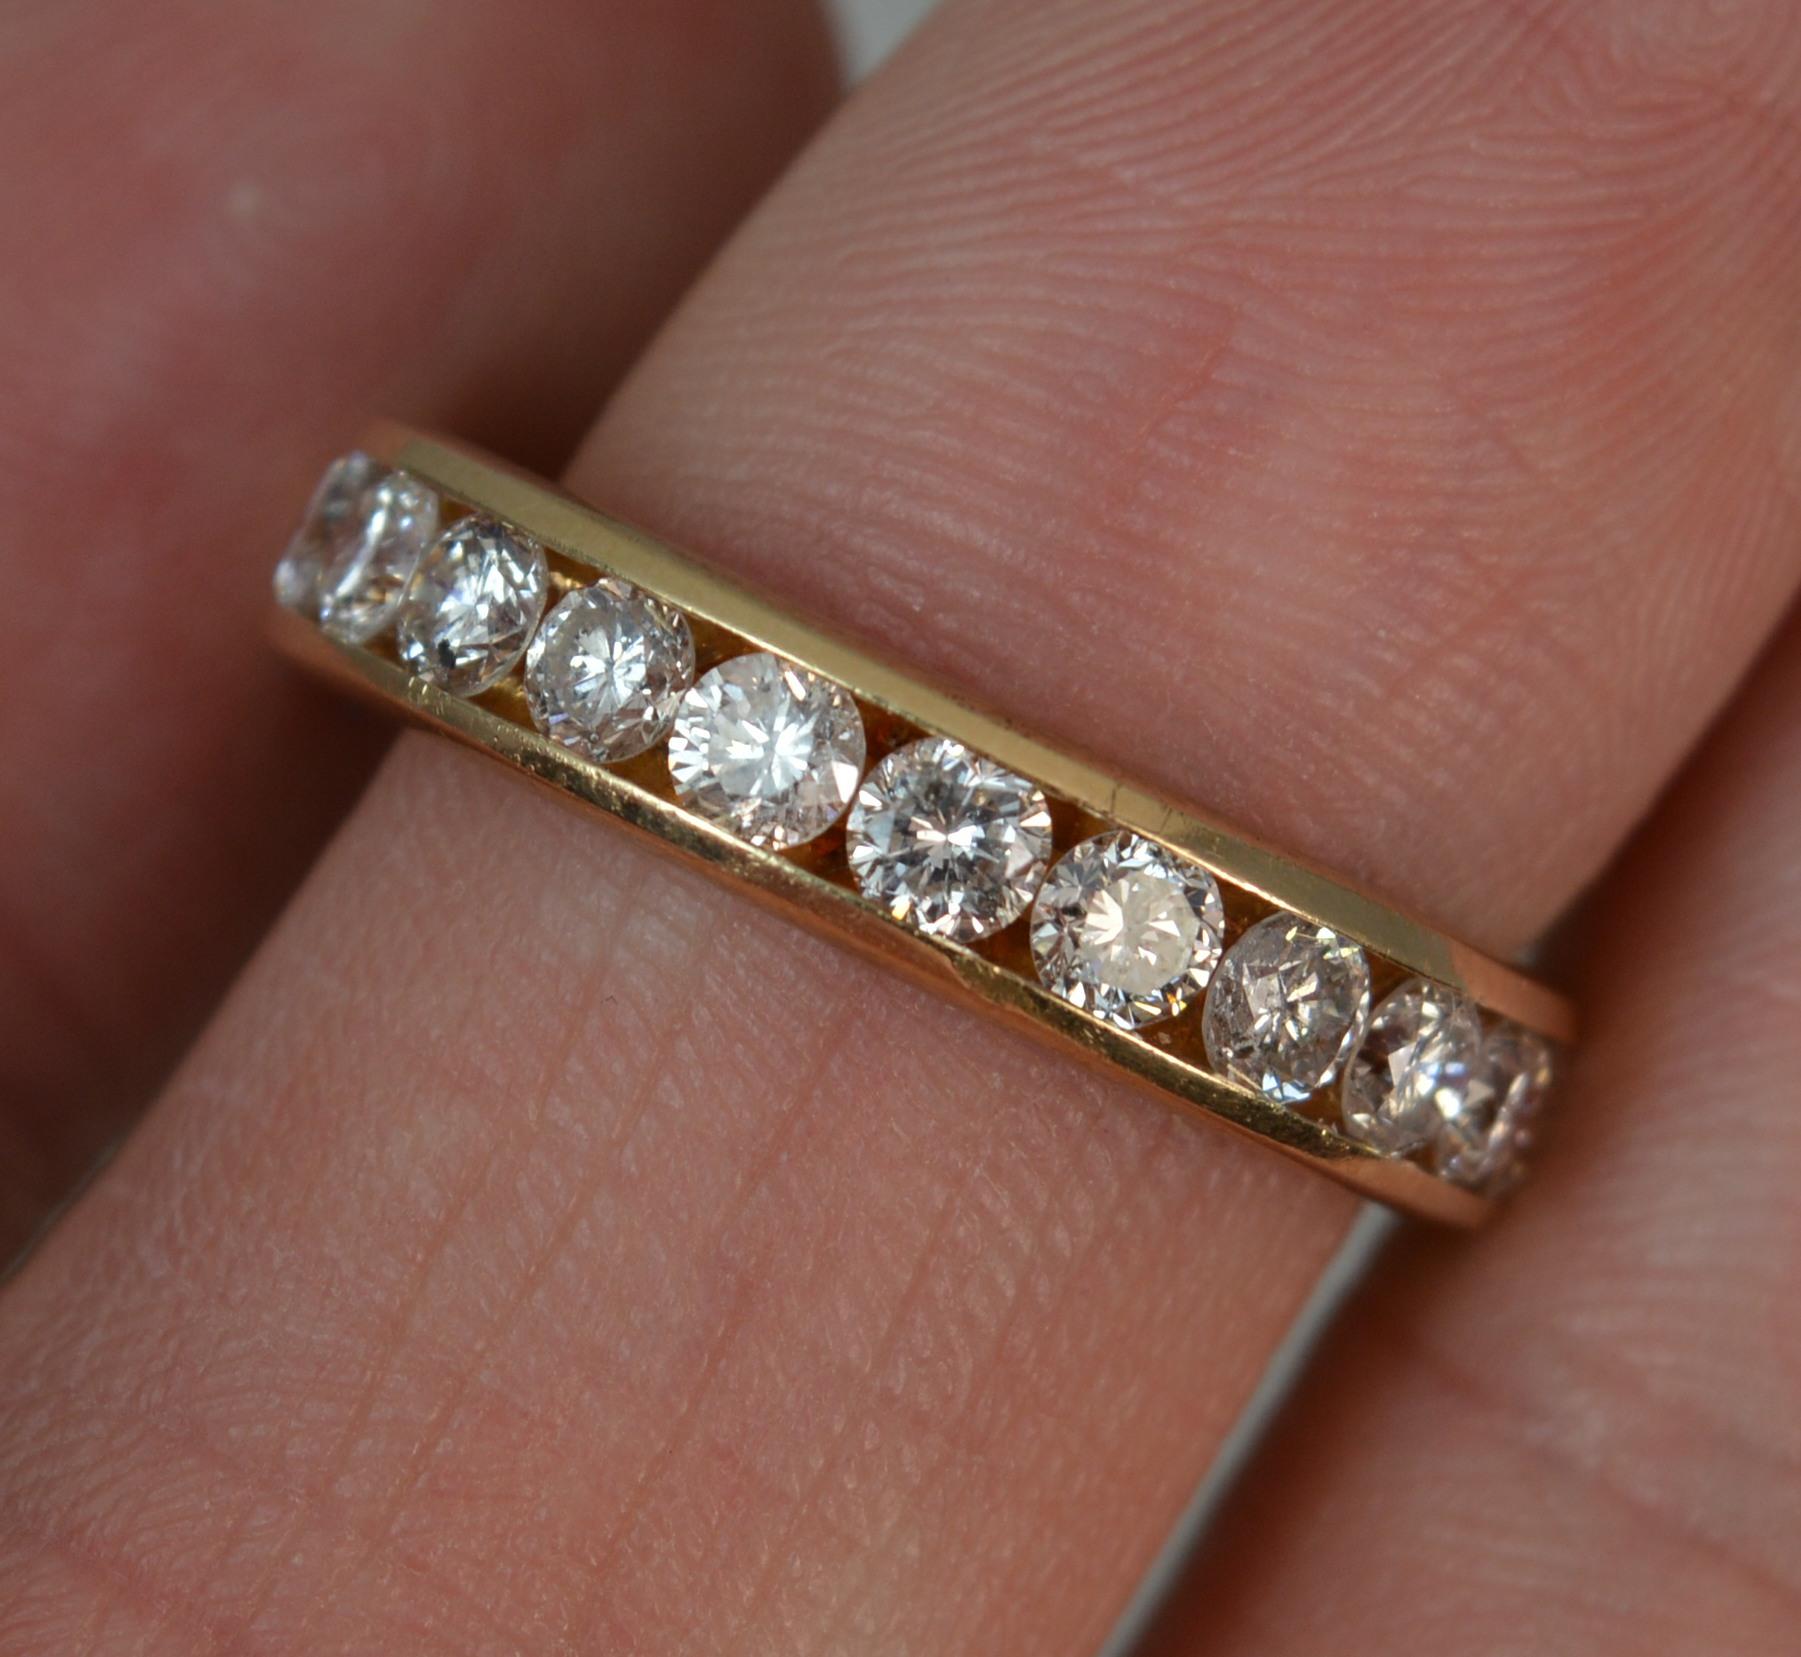 A stunning 14 carat gold and diamond ring.
14 carat yellow gold shank with channel setting.
Designed with eelven natural round brilliant cut diamonds of uniform size, total weight of 1.00 carats. Sparkly example.
21mm spread of stones, 4.2mm wide